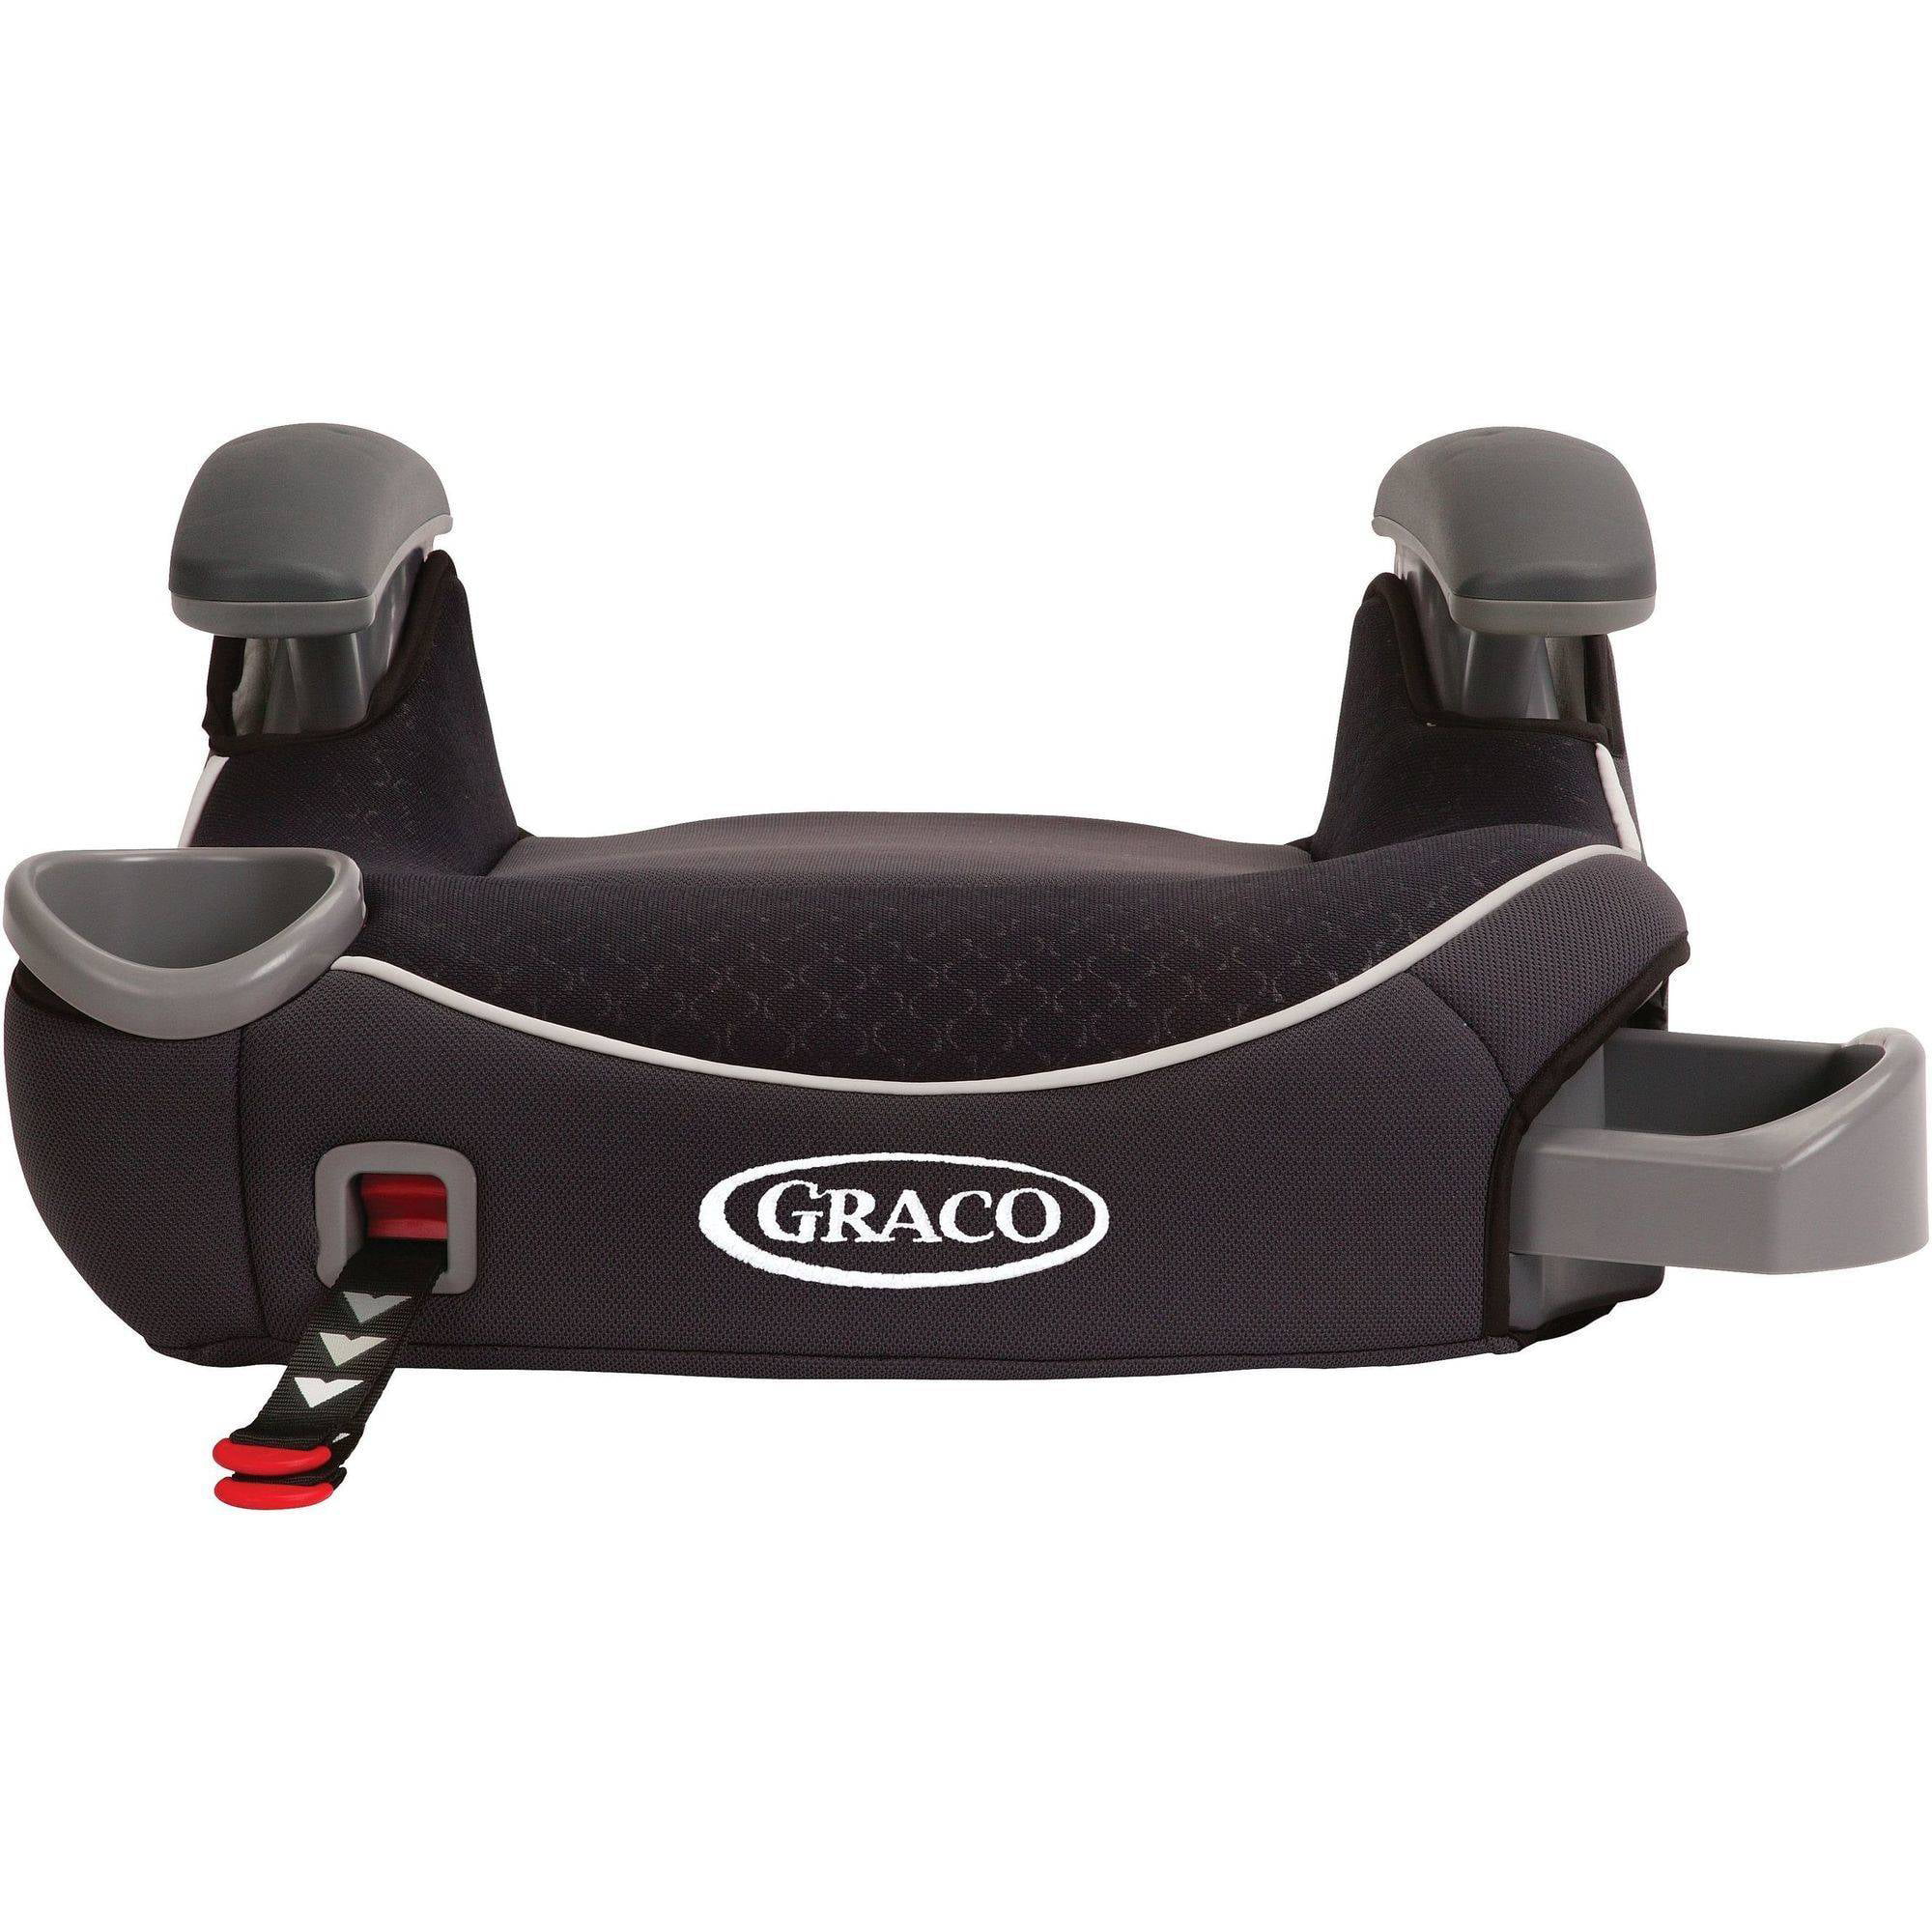 graco affix backless booster